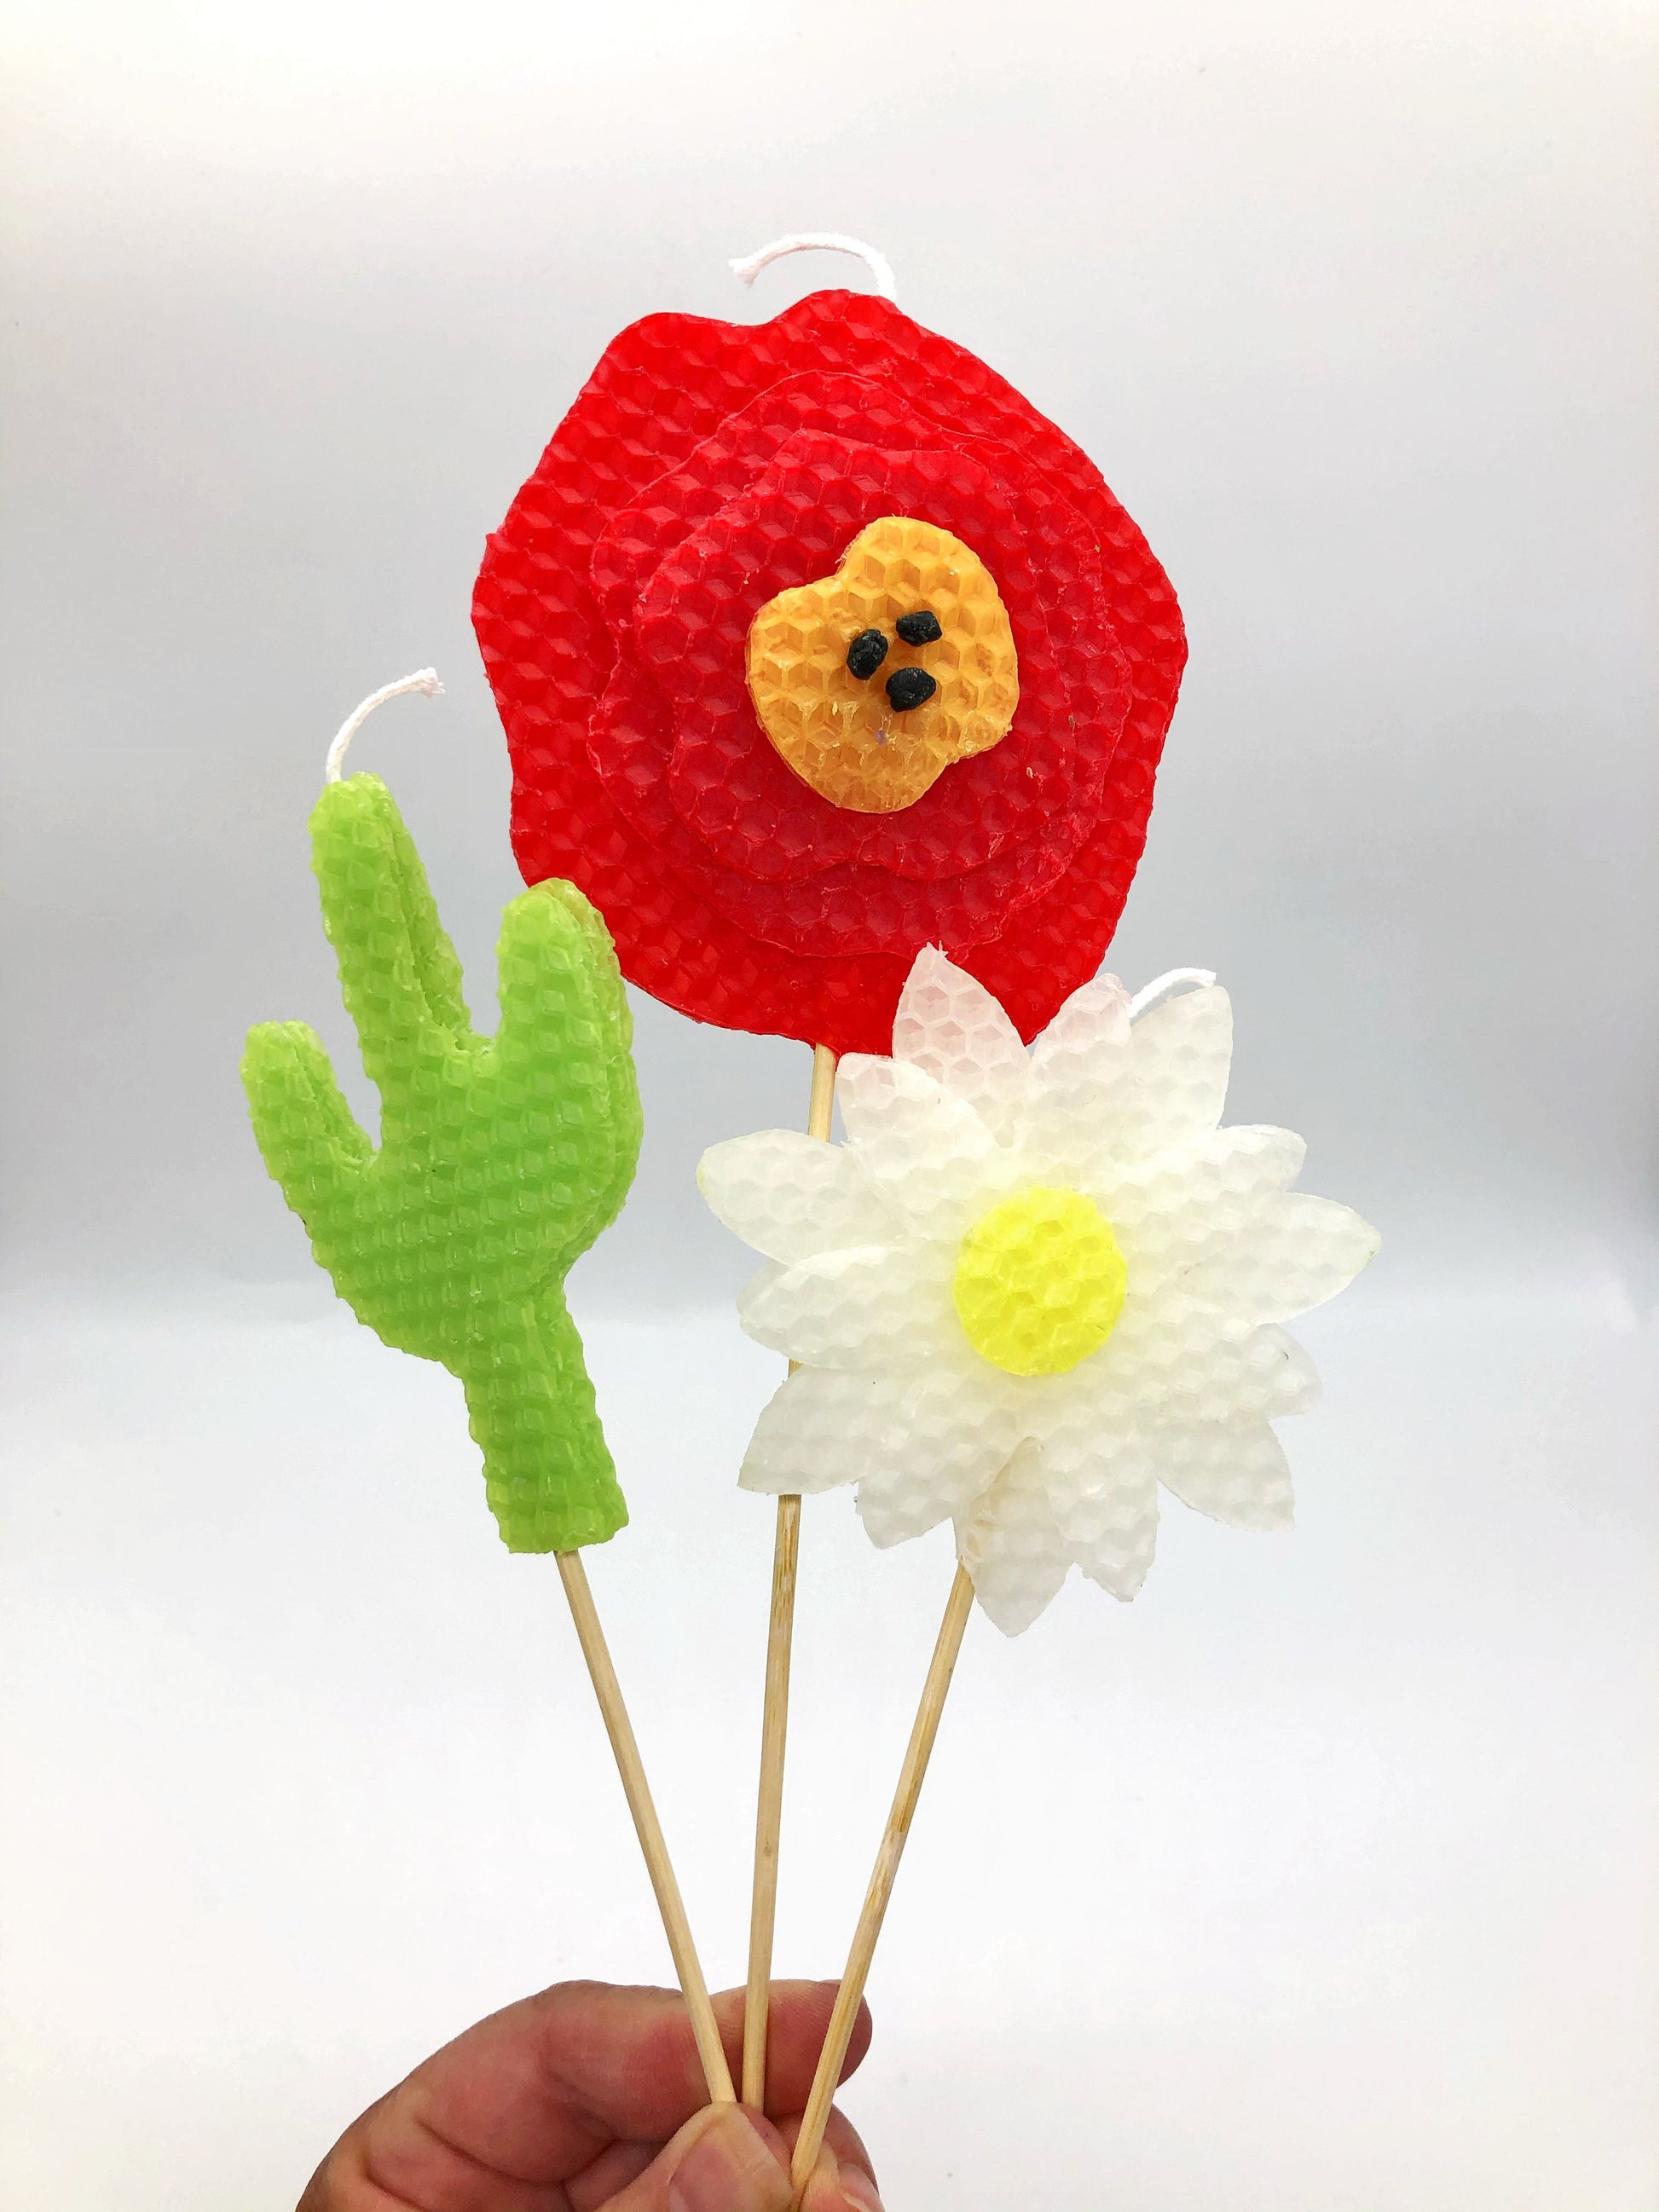 Large beeswax candles in varying shapes including lime green cactus, red poppy, and white flower